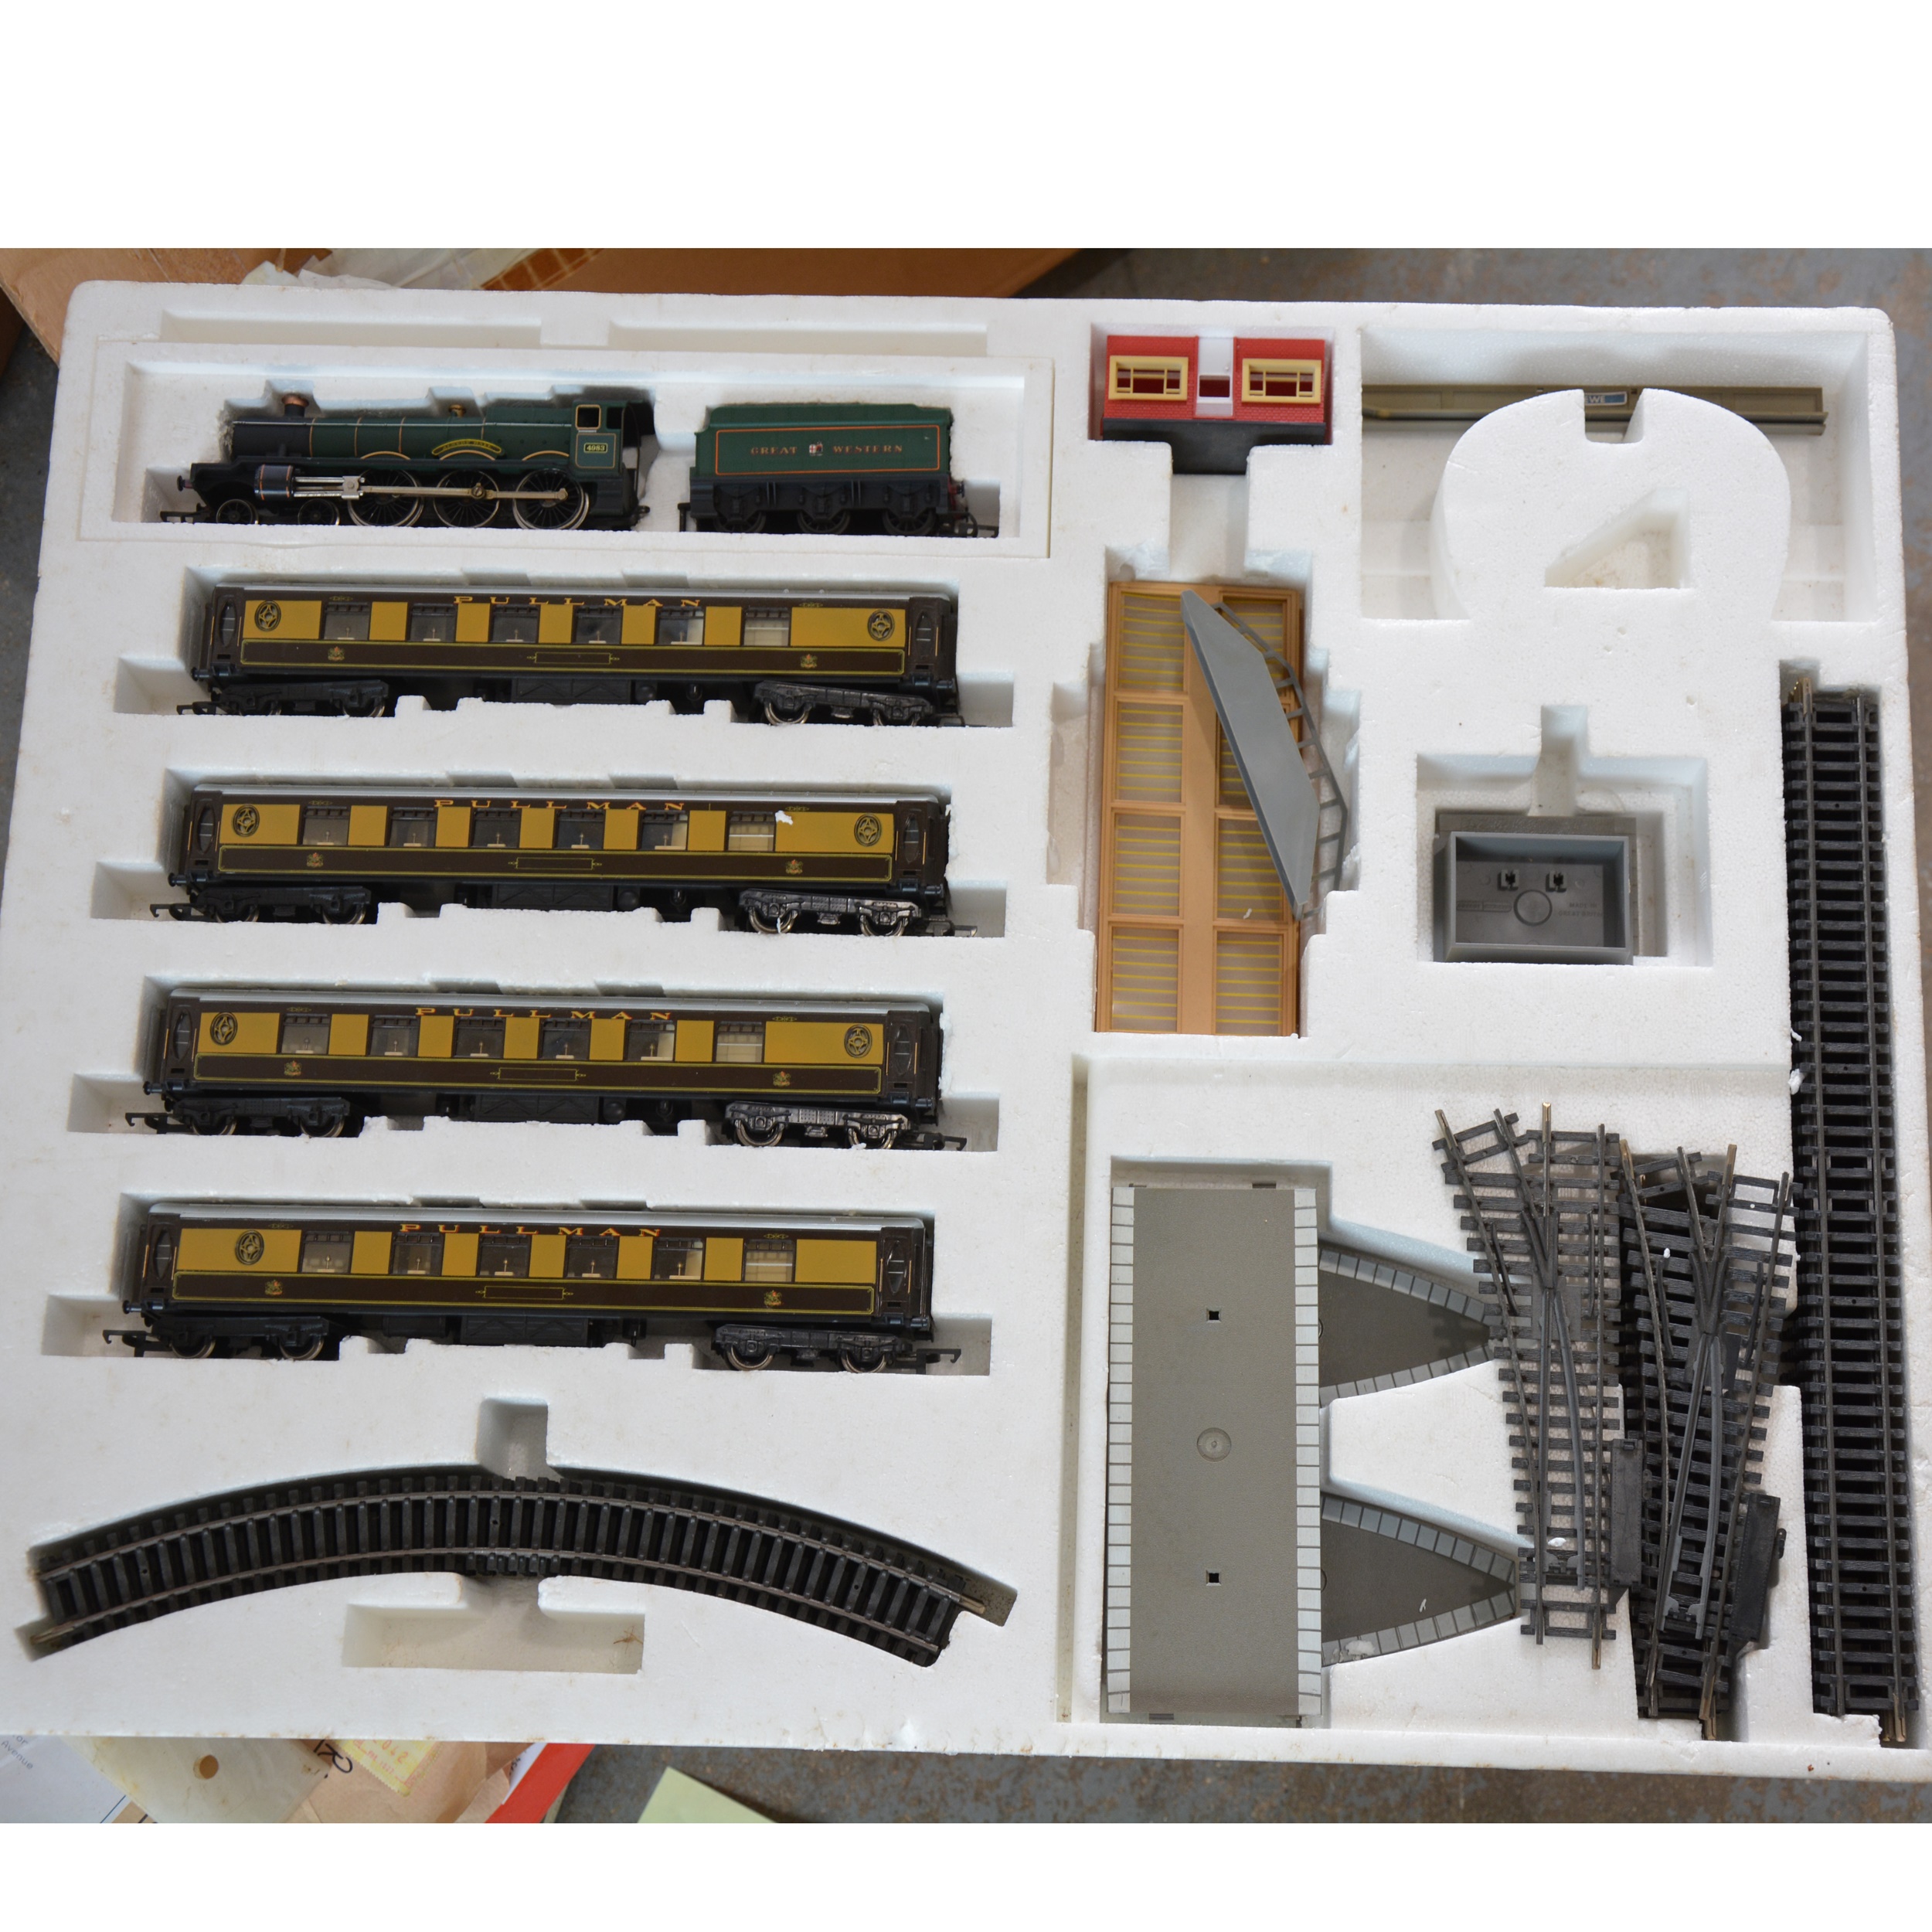 OO gauge model railway collection, mostly Hornby, including R687 Silver Jublee set - Image 2 of 3